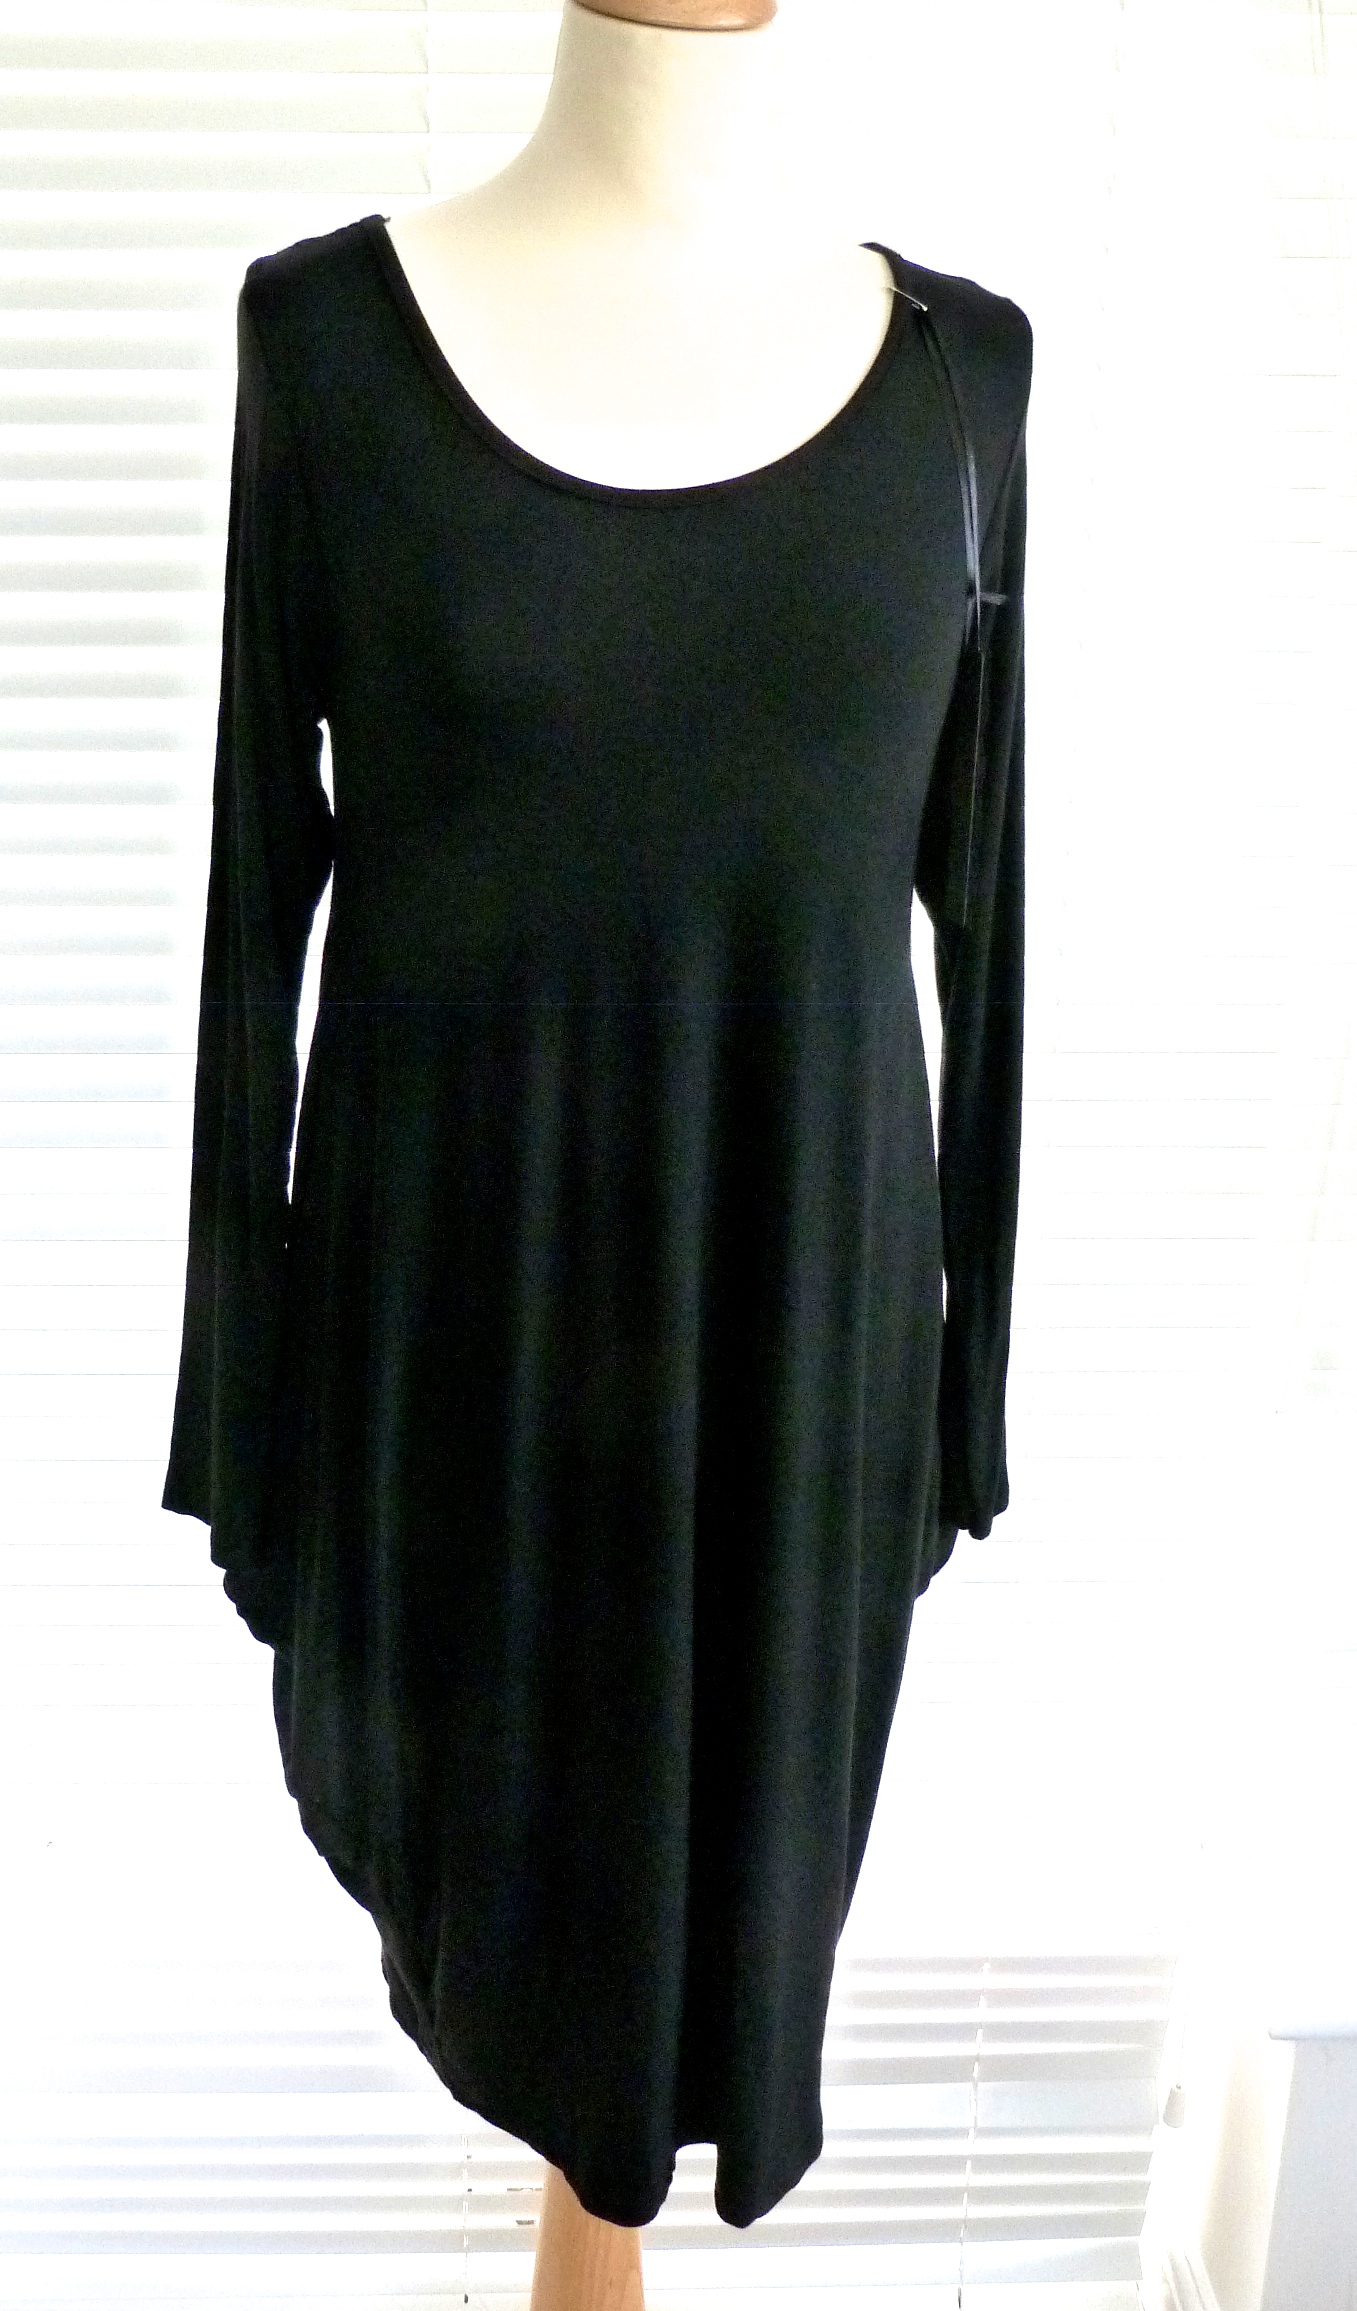 Ladies quirky stretch jersey dress - perfect for underlayering ...